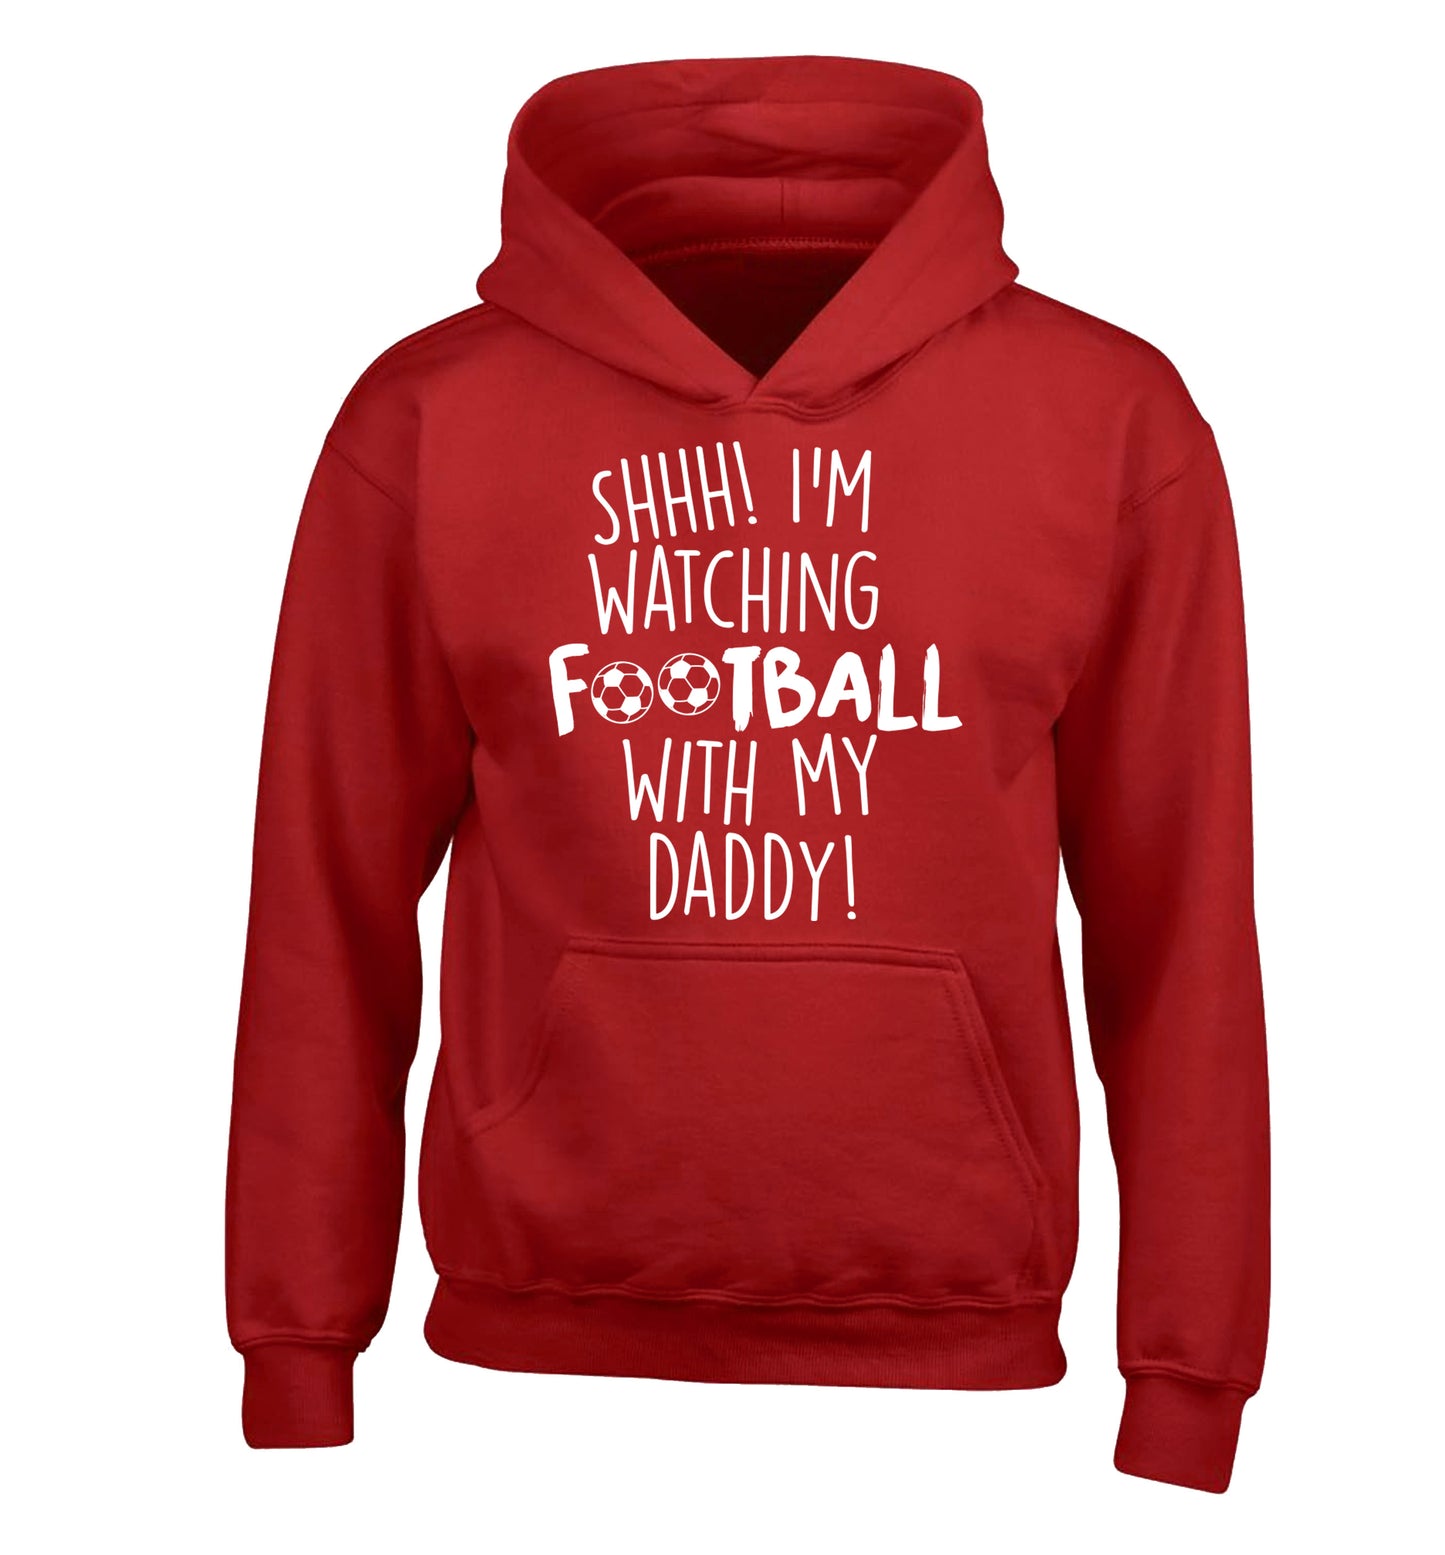 Shhh I'm watching football with my daddy children's red hoodie 12-14 Years